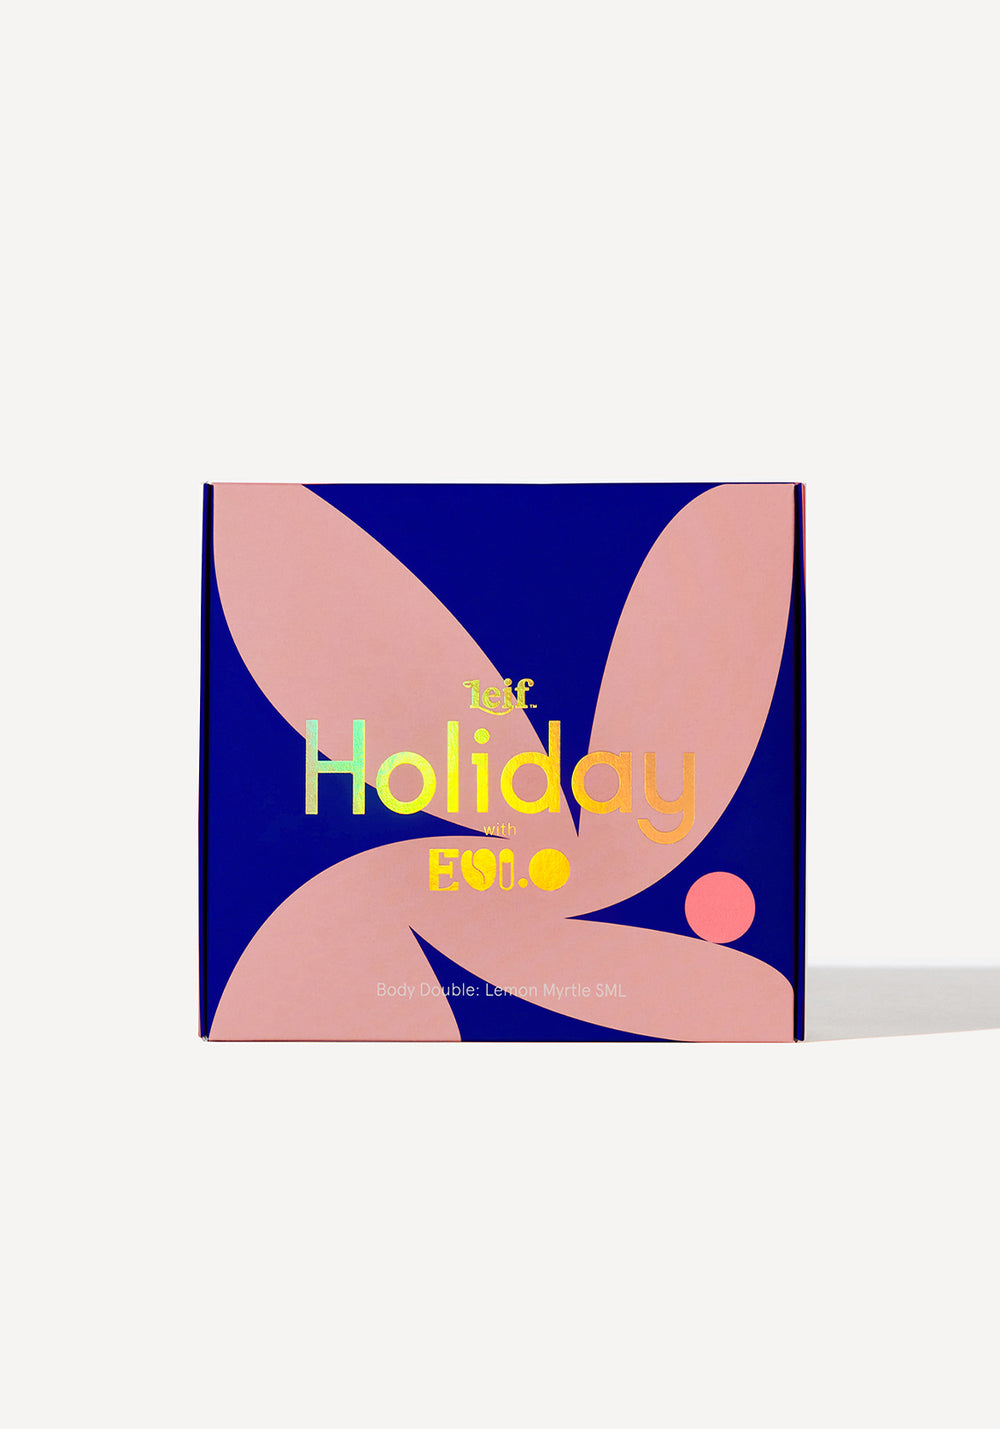 LIMITED EDITION 'HOLIDAY WITH EVI O' BODY DOUBLE LEMON MYRTLE SML